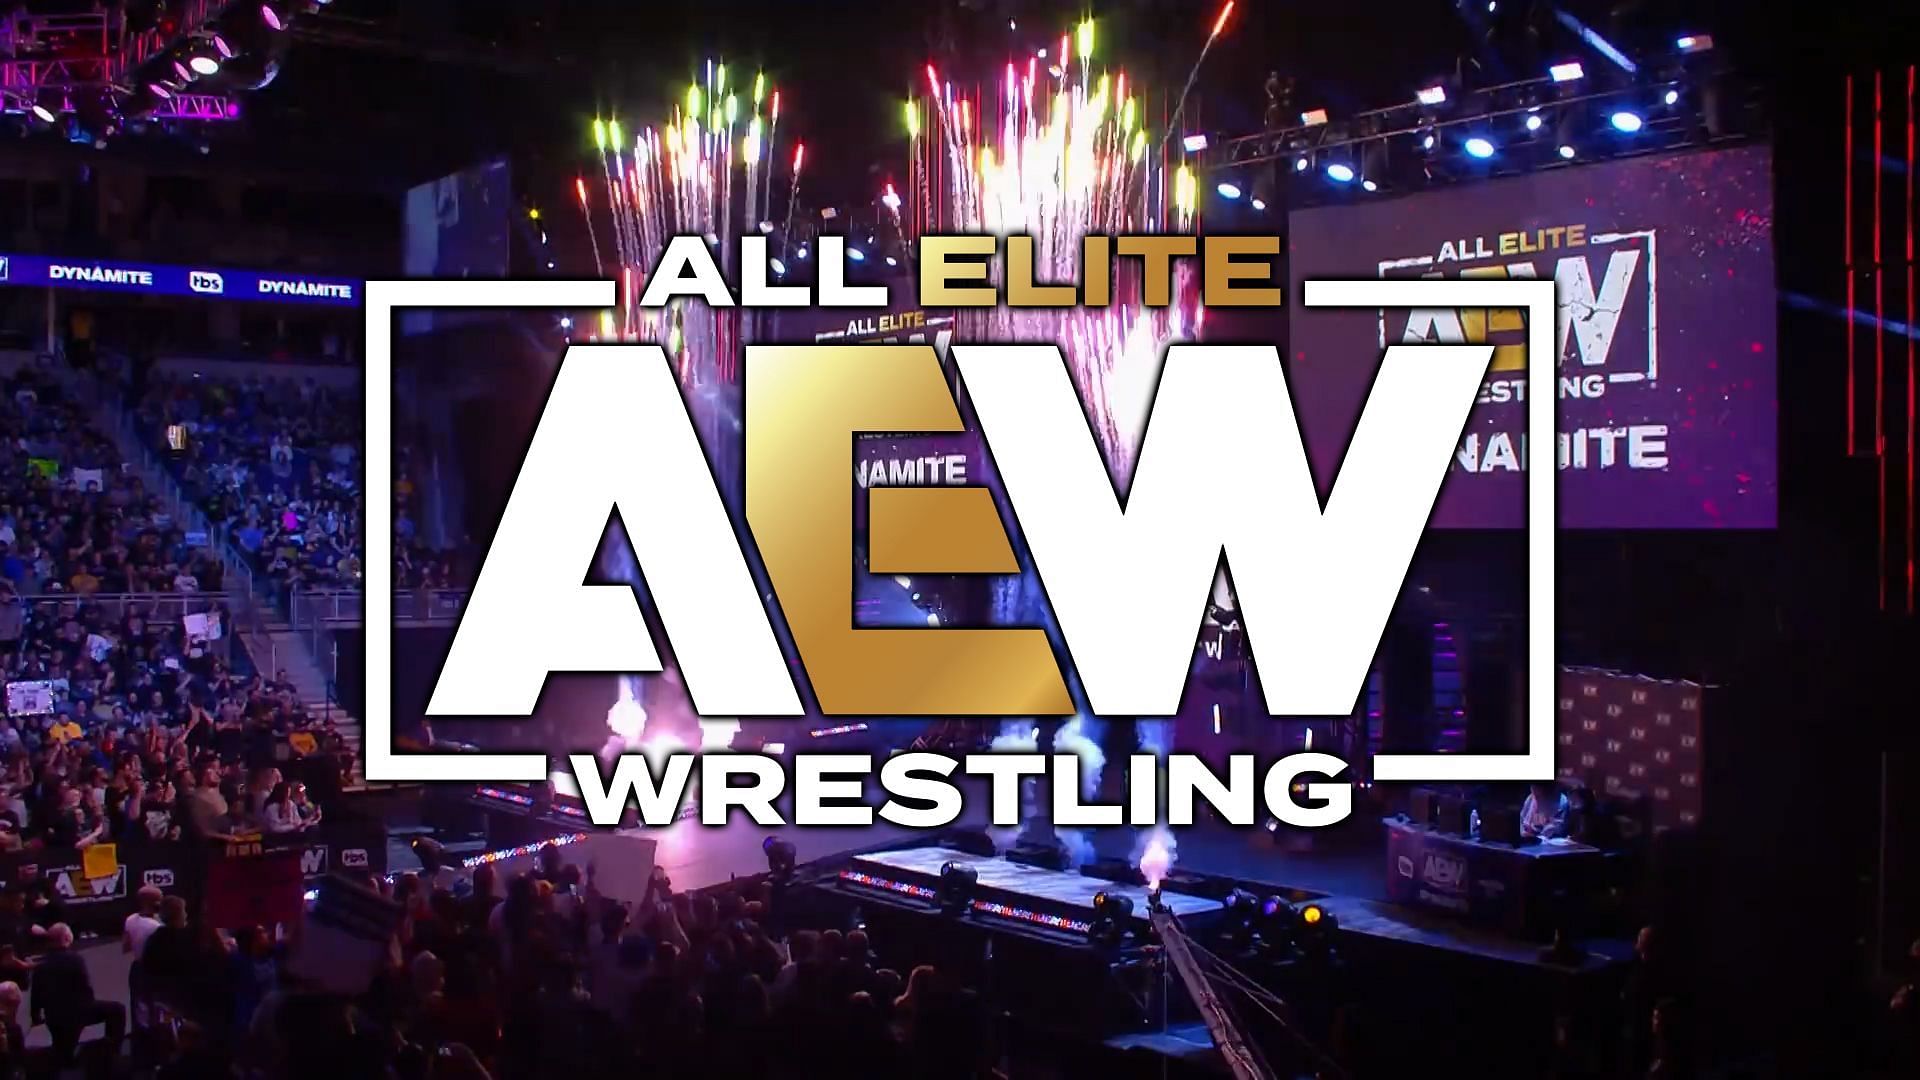 AEW recently celebrated five years of existence (image credit: All Elite Wrestling on YouTube)